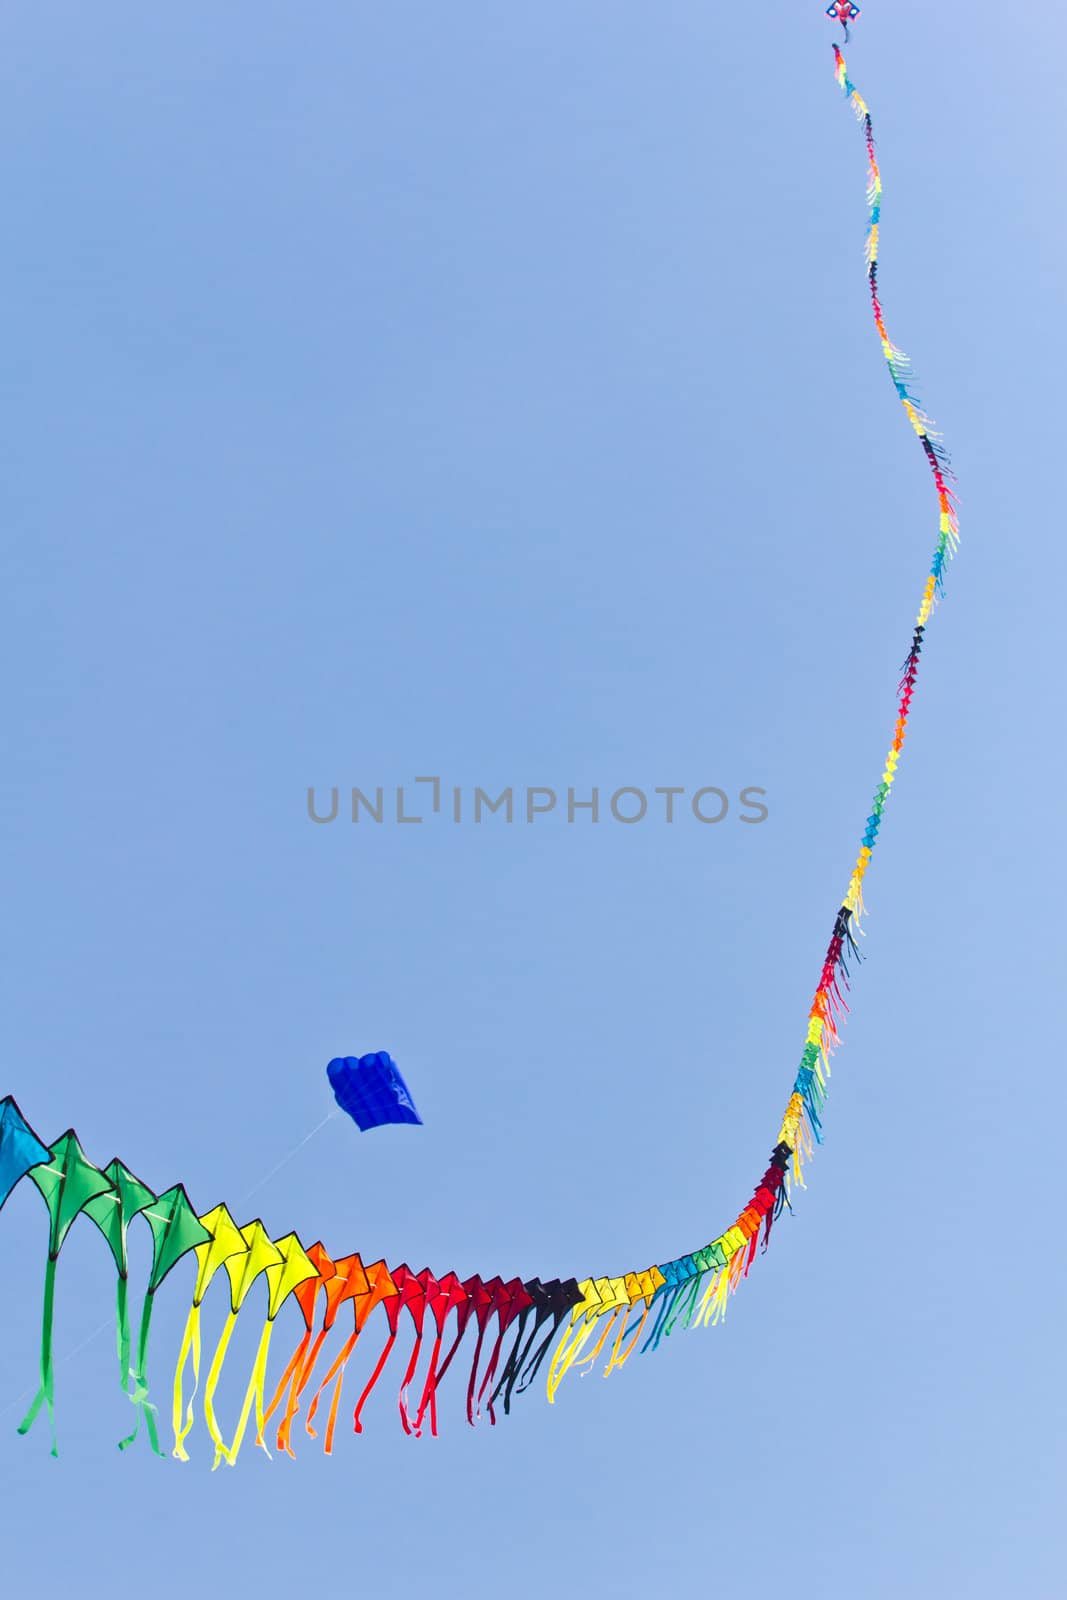 colorful of kite against blue sky by tungphoto